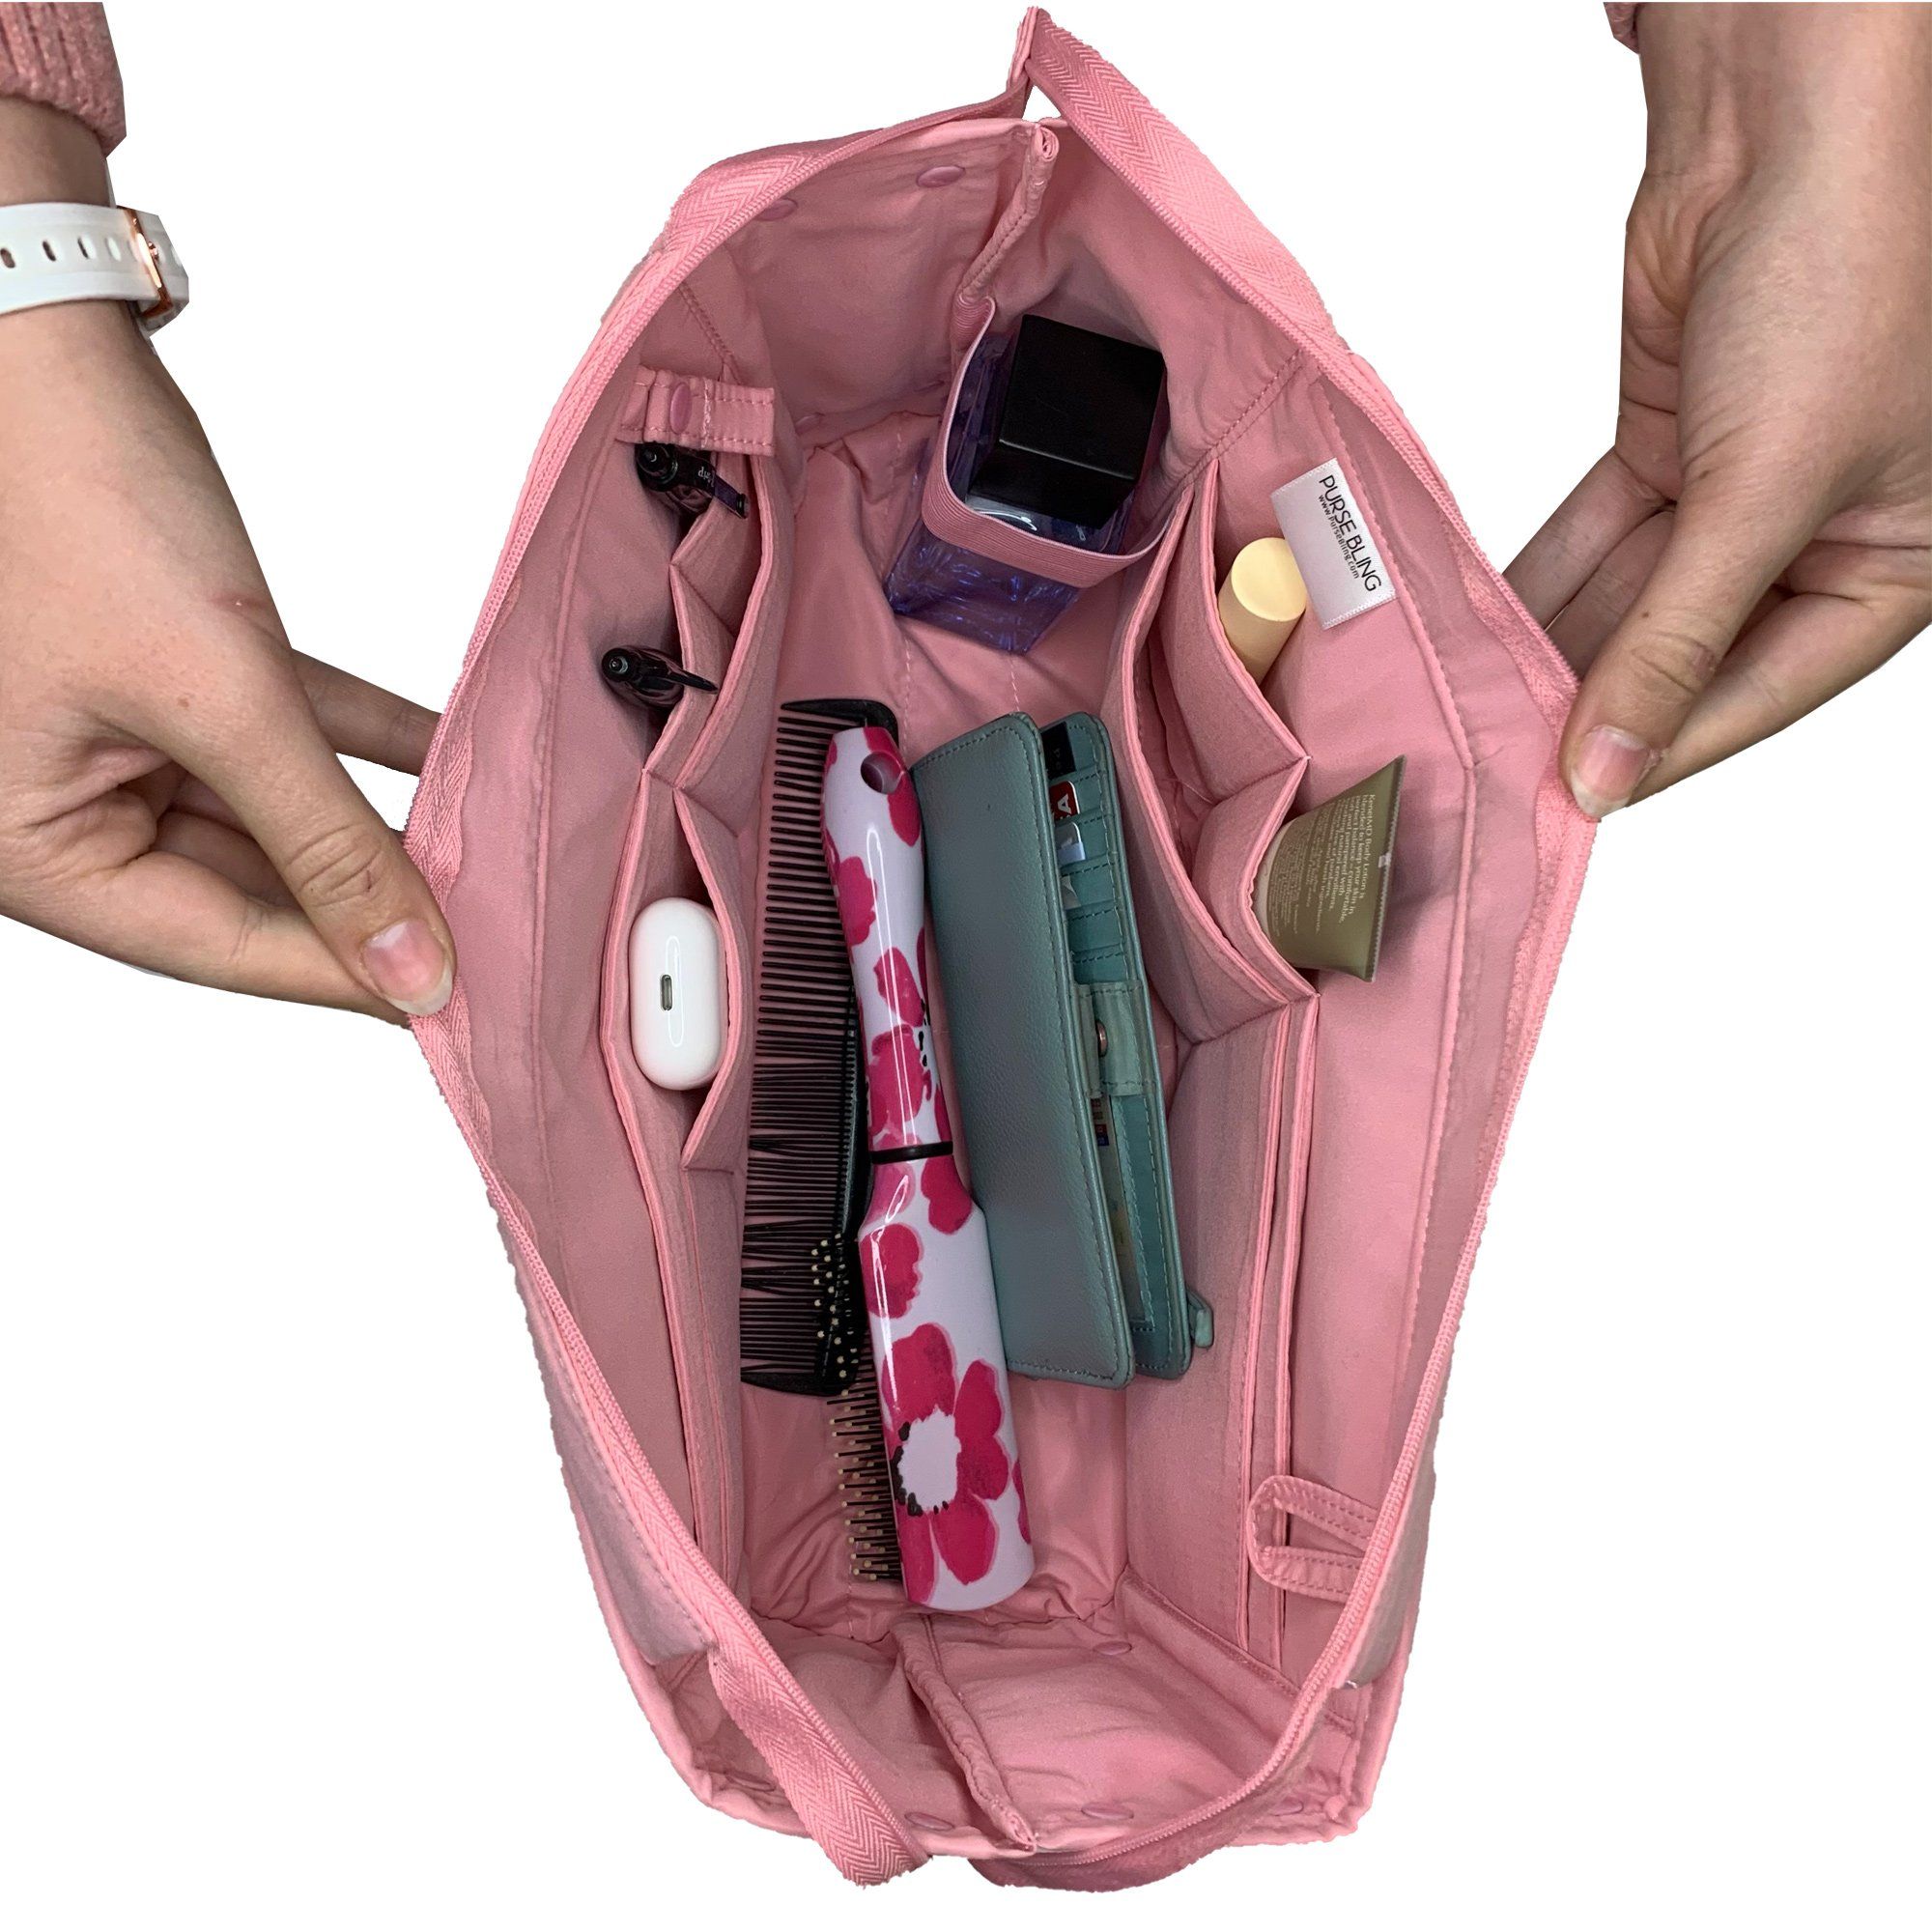 The Different Types Of Purse Organizers - Purse Bling